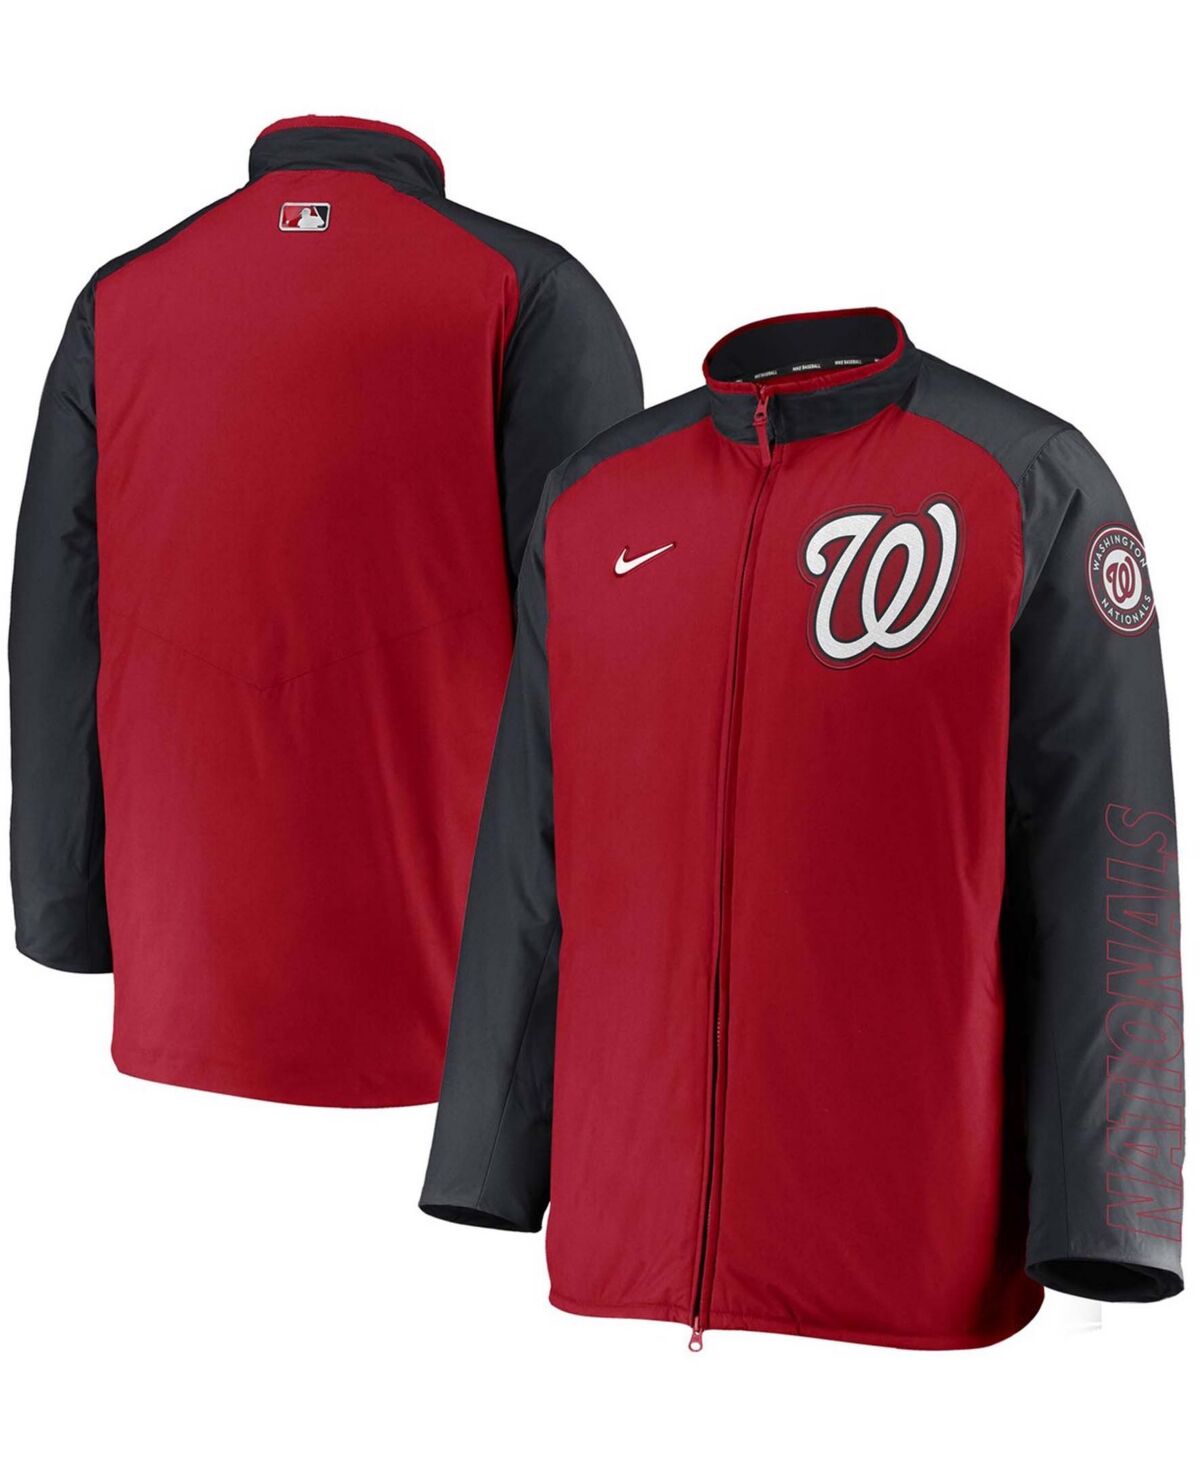 Nike Men's Red, Navy Washington Nationals Authentic Collection Dugout Full-Zip Jacket - Red, Navy